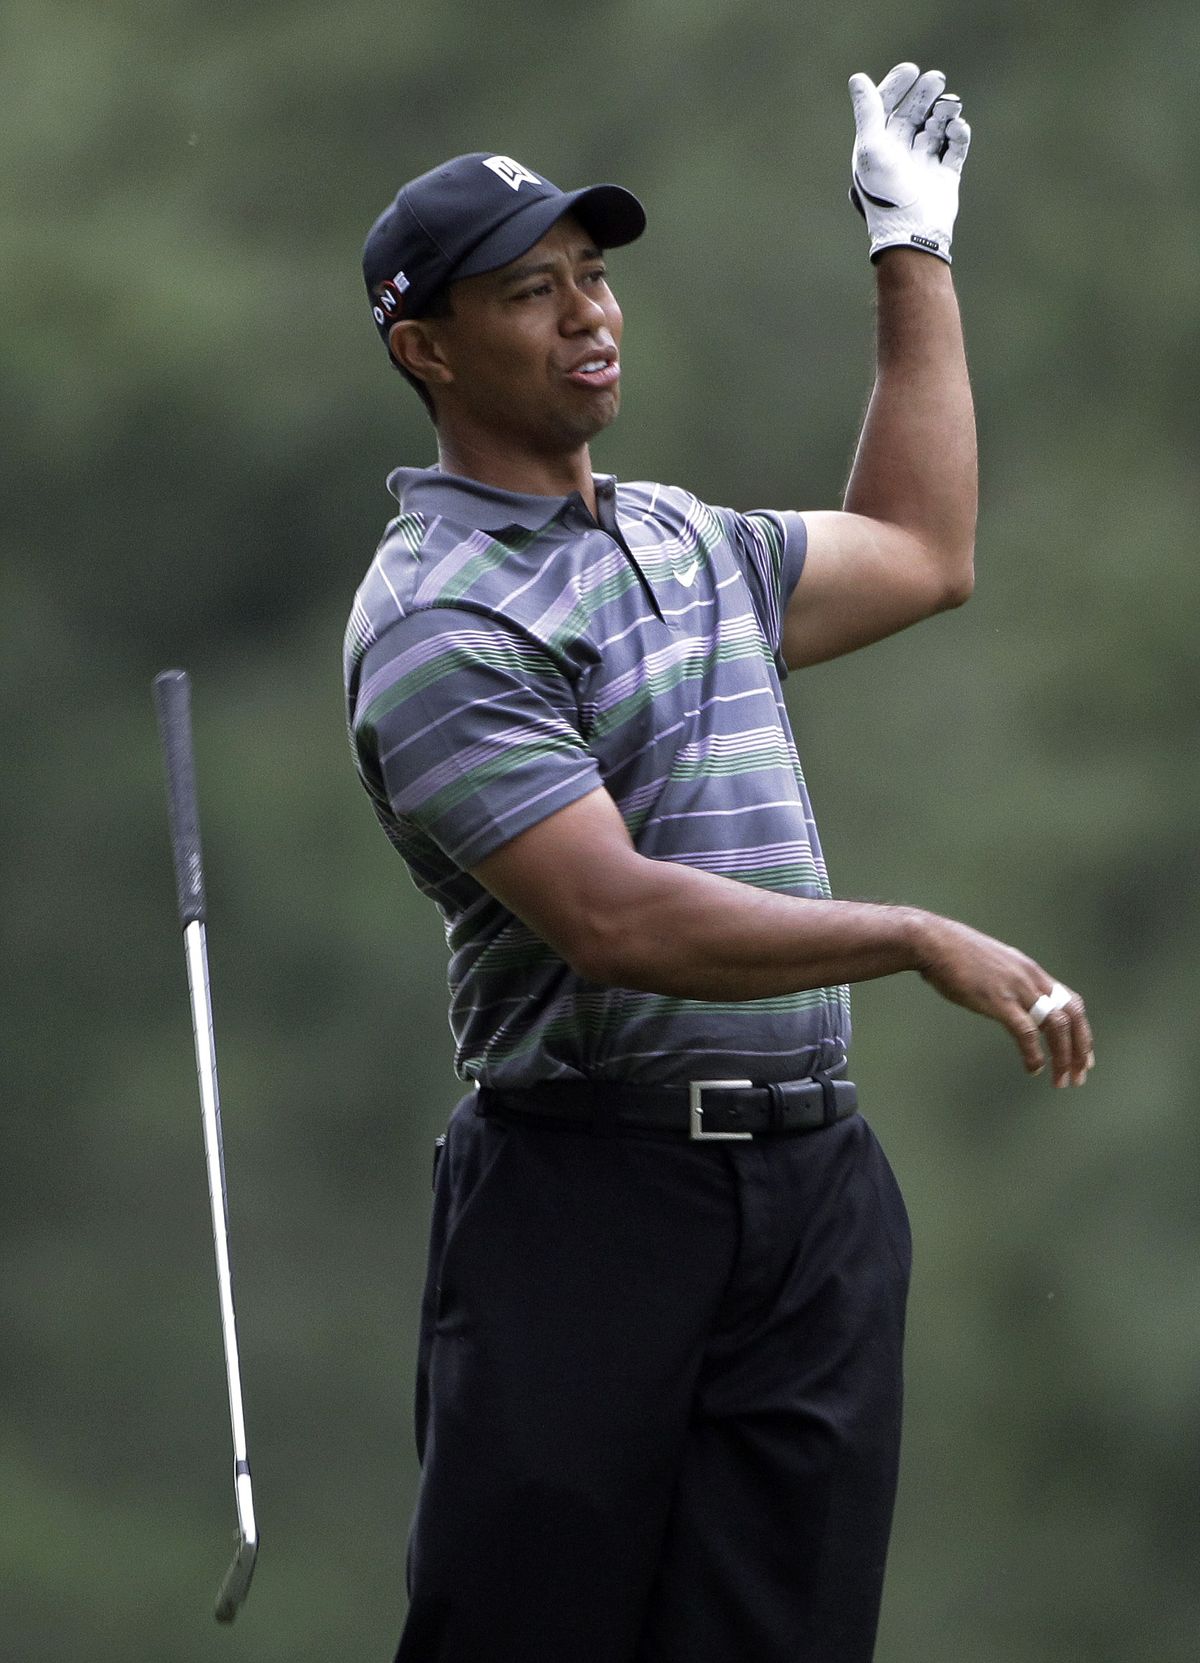 Tiger Woods’ round wasn’t perfect, as shown by his reaction to missing an eagle putt on the 13th hole. (Associated Press)